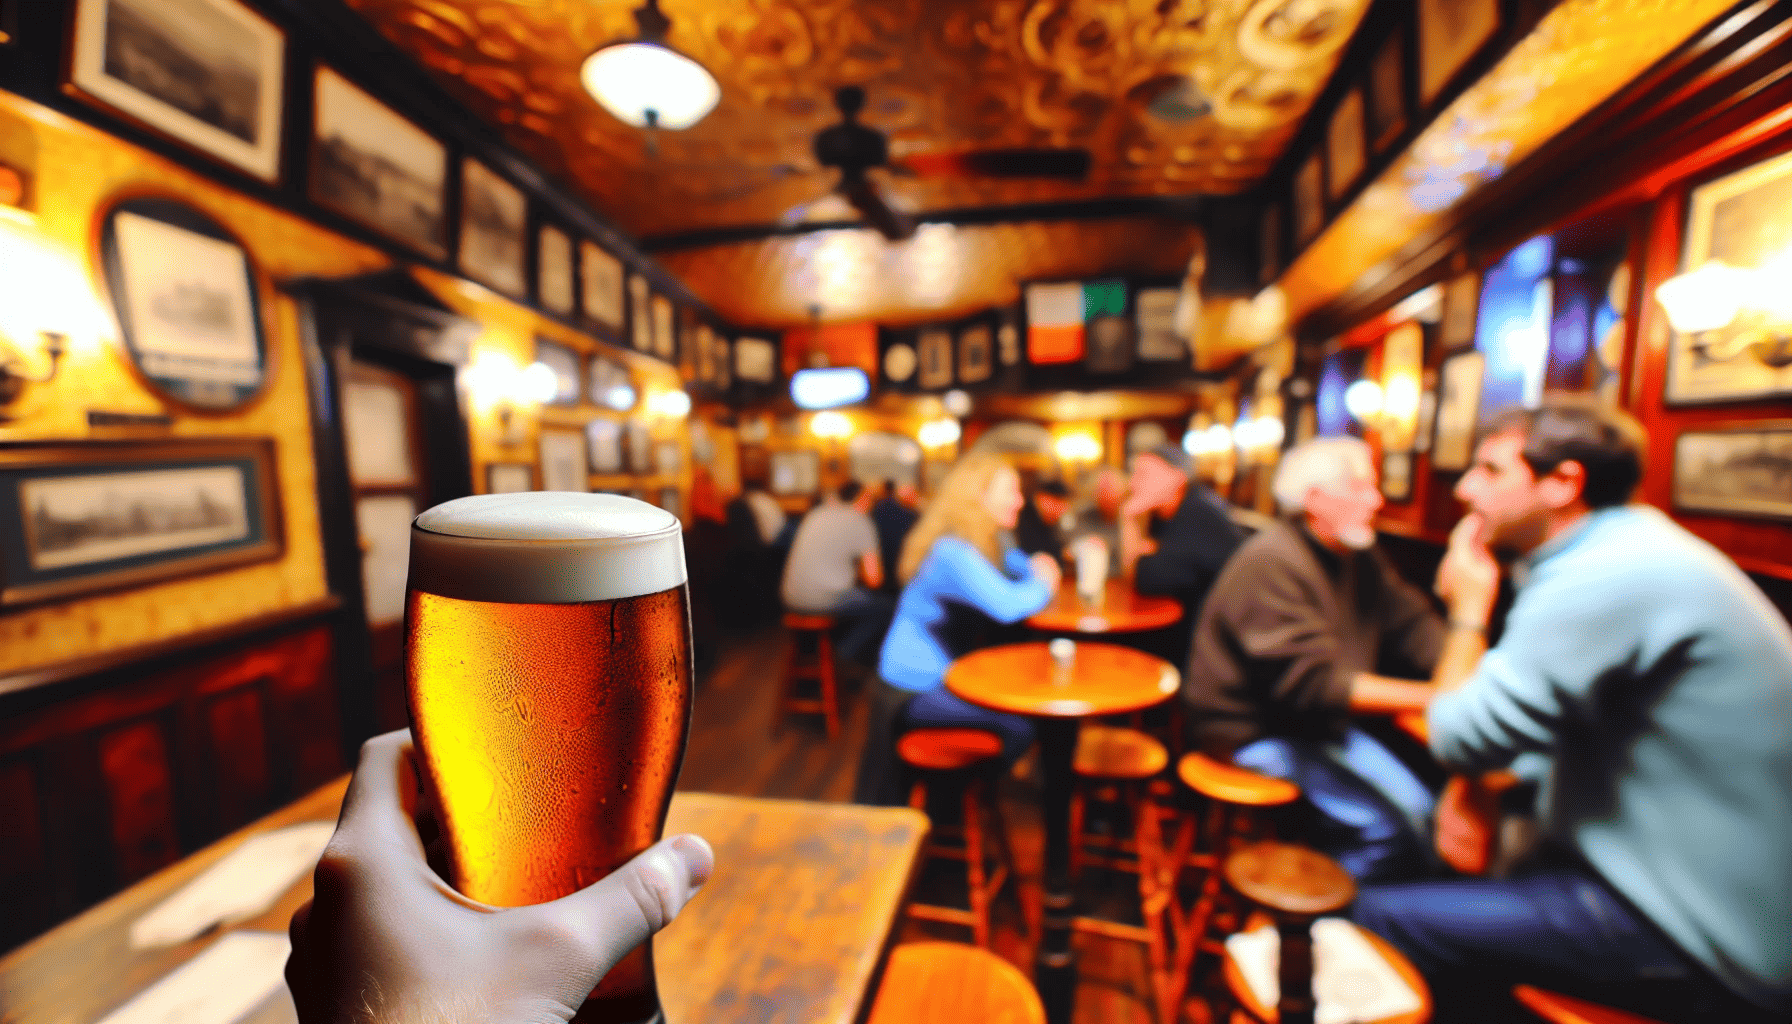 A refreshing pint of Irish pale ale served in a traditional pub setting